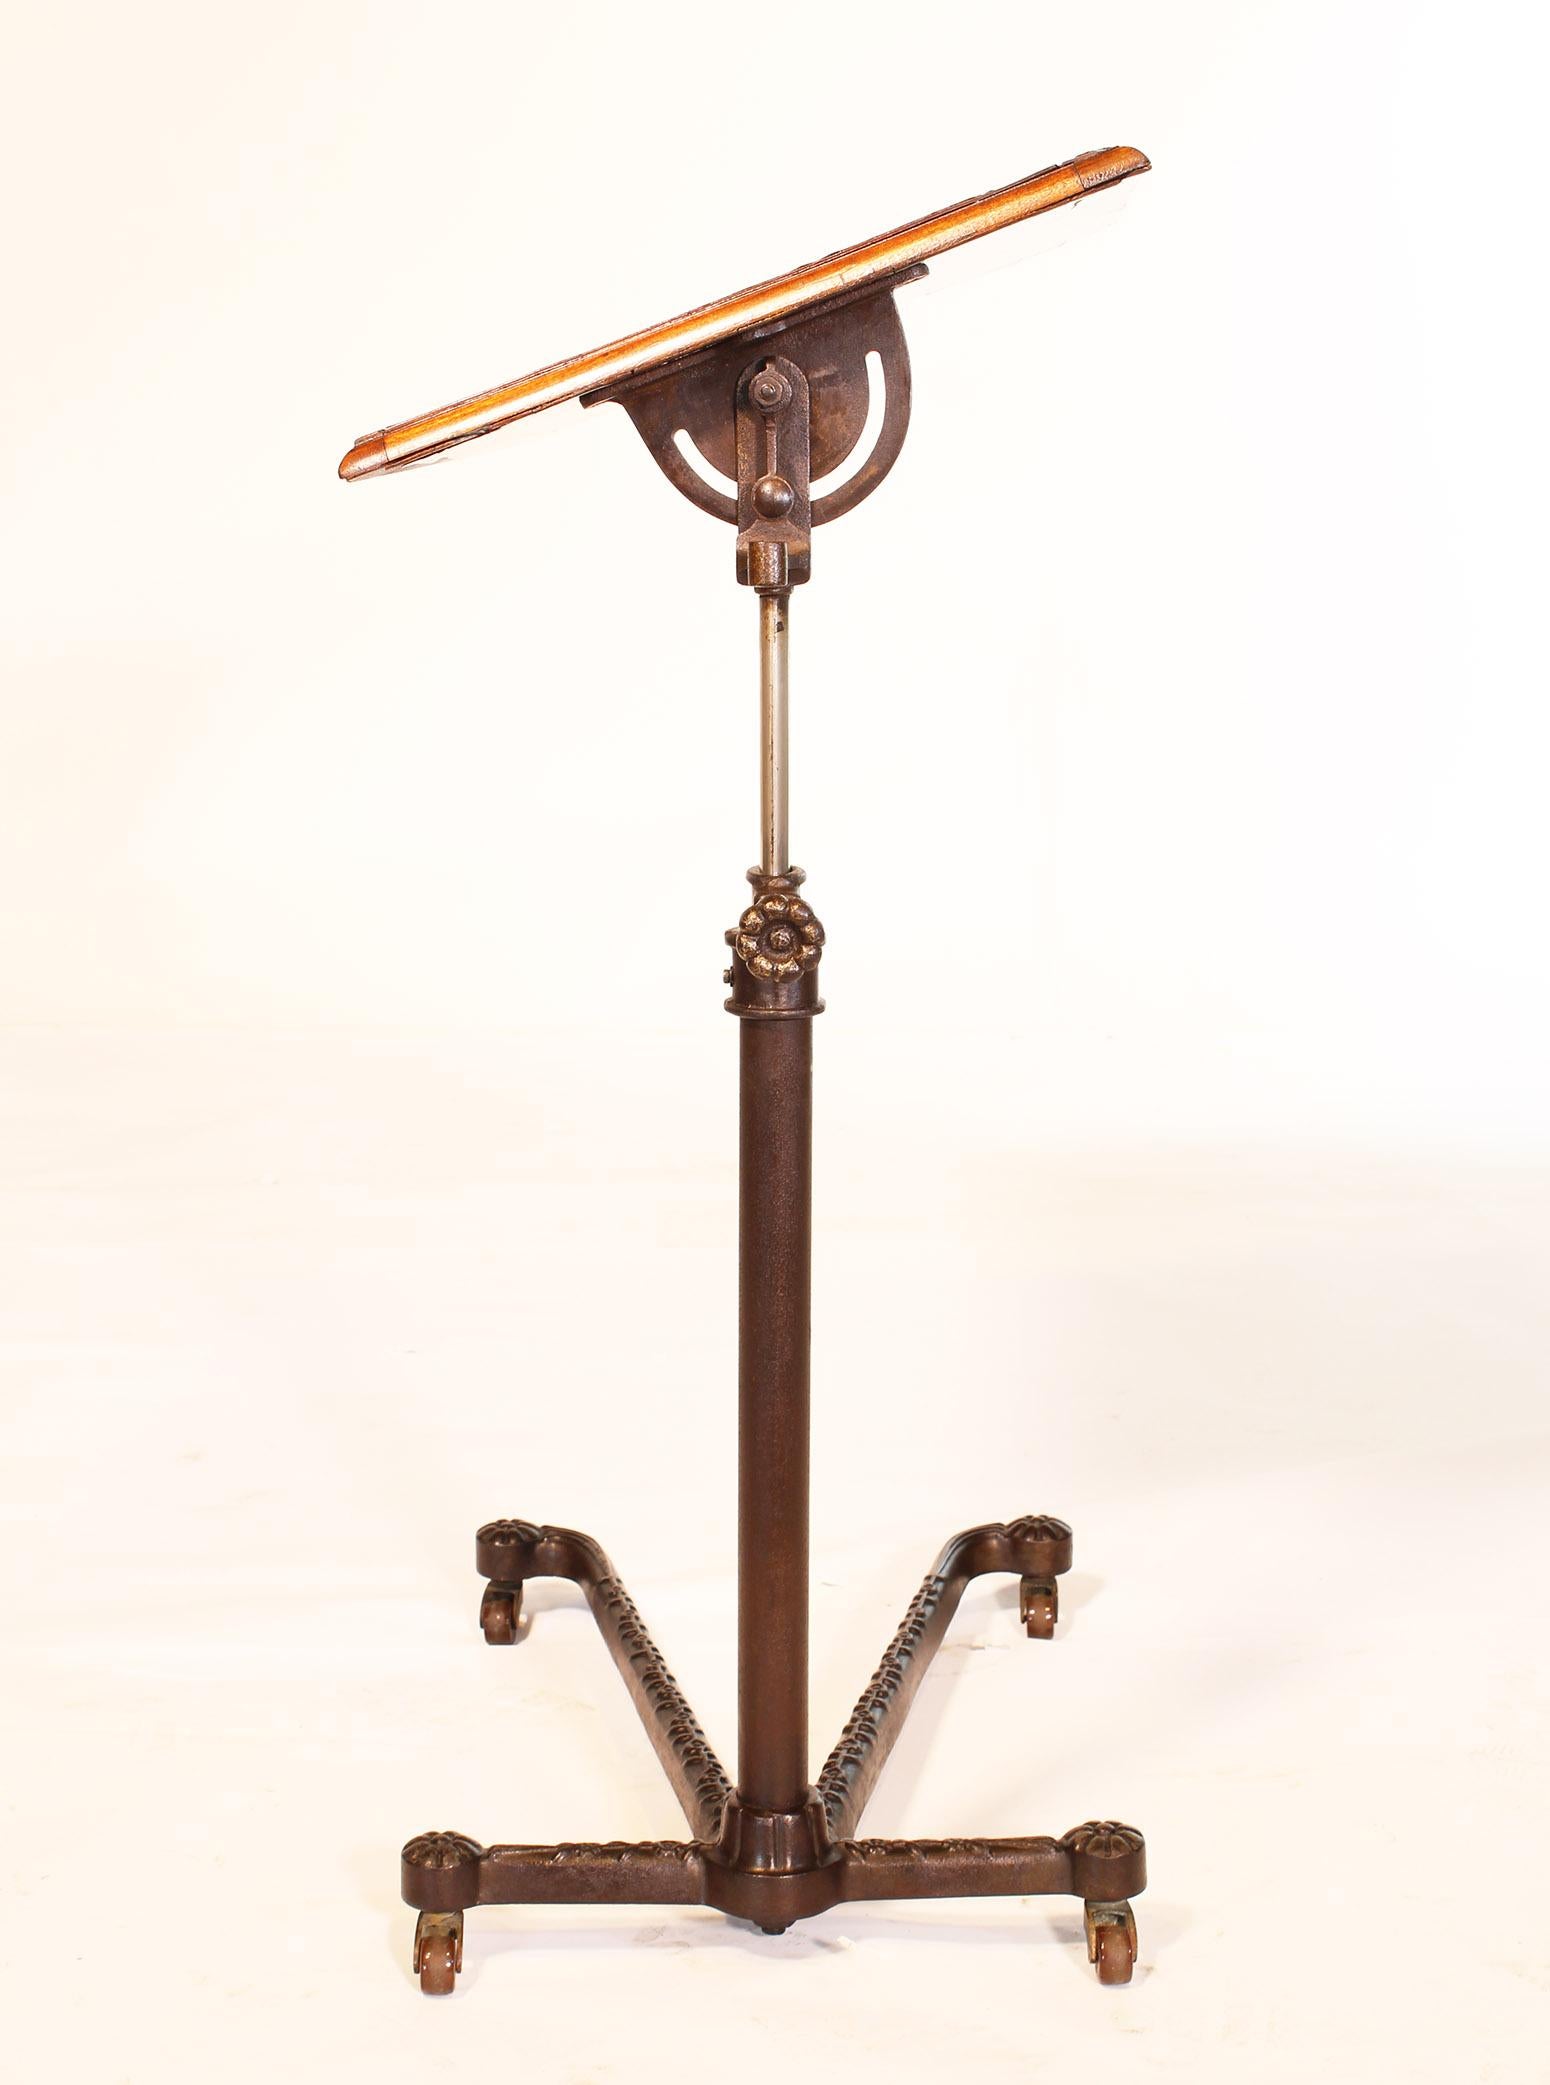 Original authentic mahogany and cast iron hospital bedside tilt-top table for serving. Made in London, England. Mahogany top has some cracks and other wear, is structurally sound. Cast iron decorative base in good condition. Measures: Height when